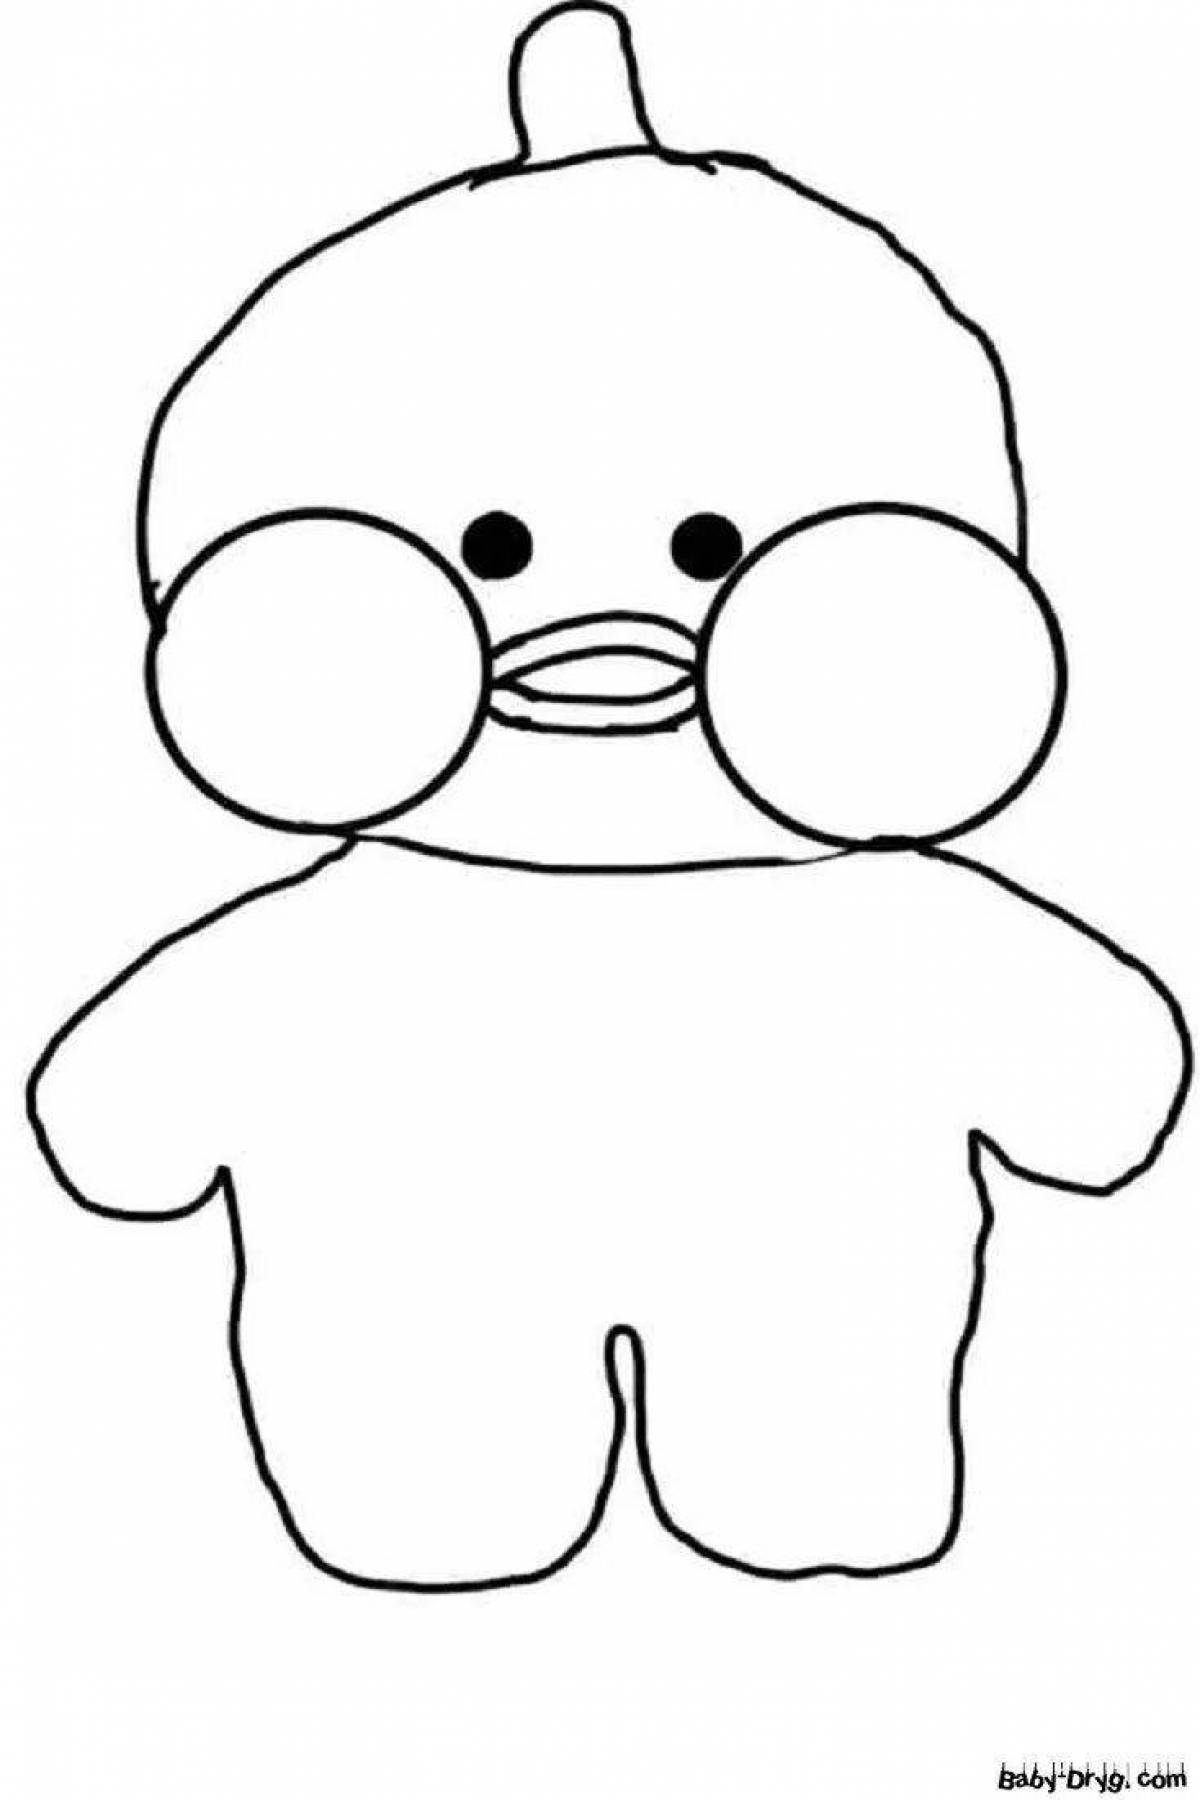 Coloring page adorable fan duck